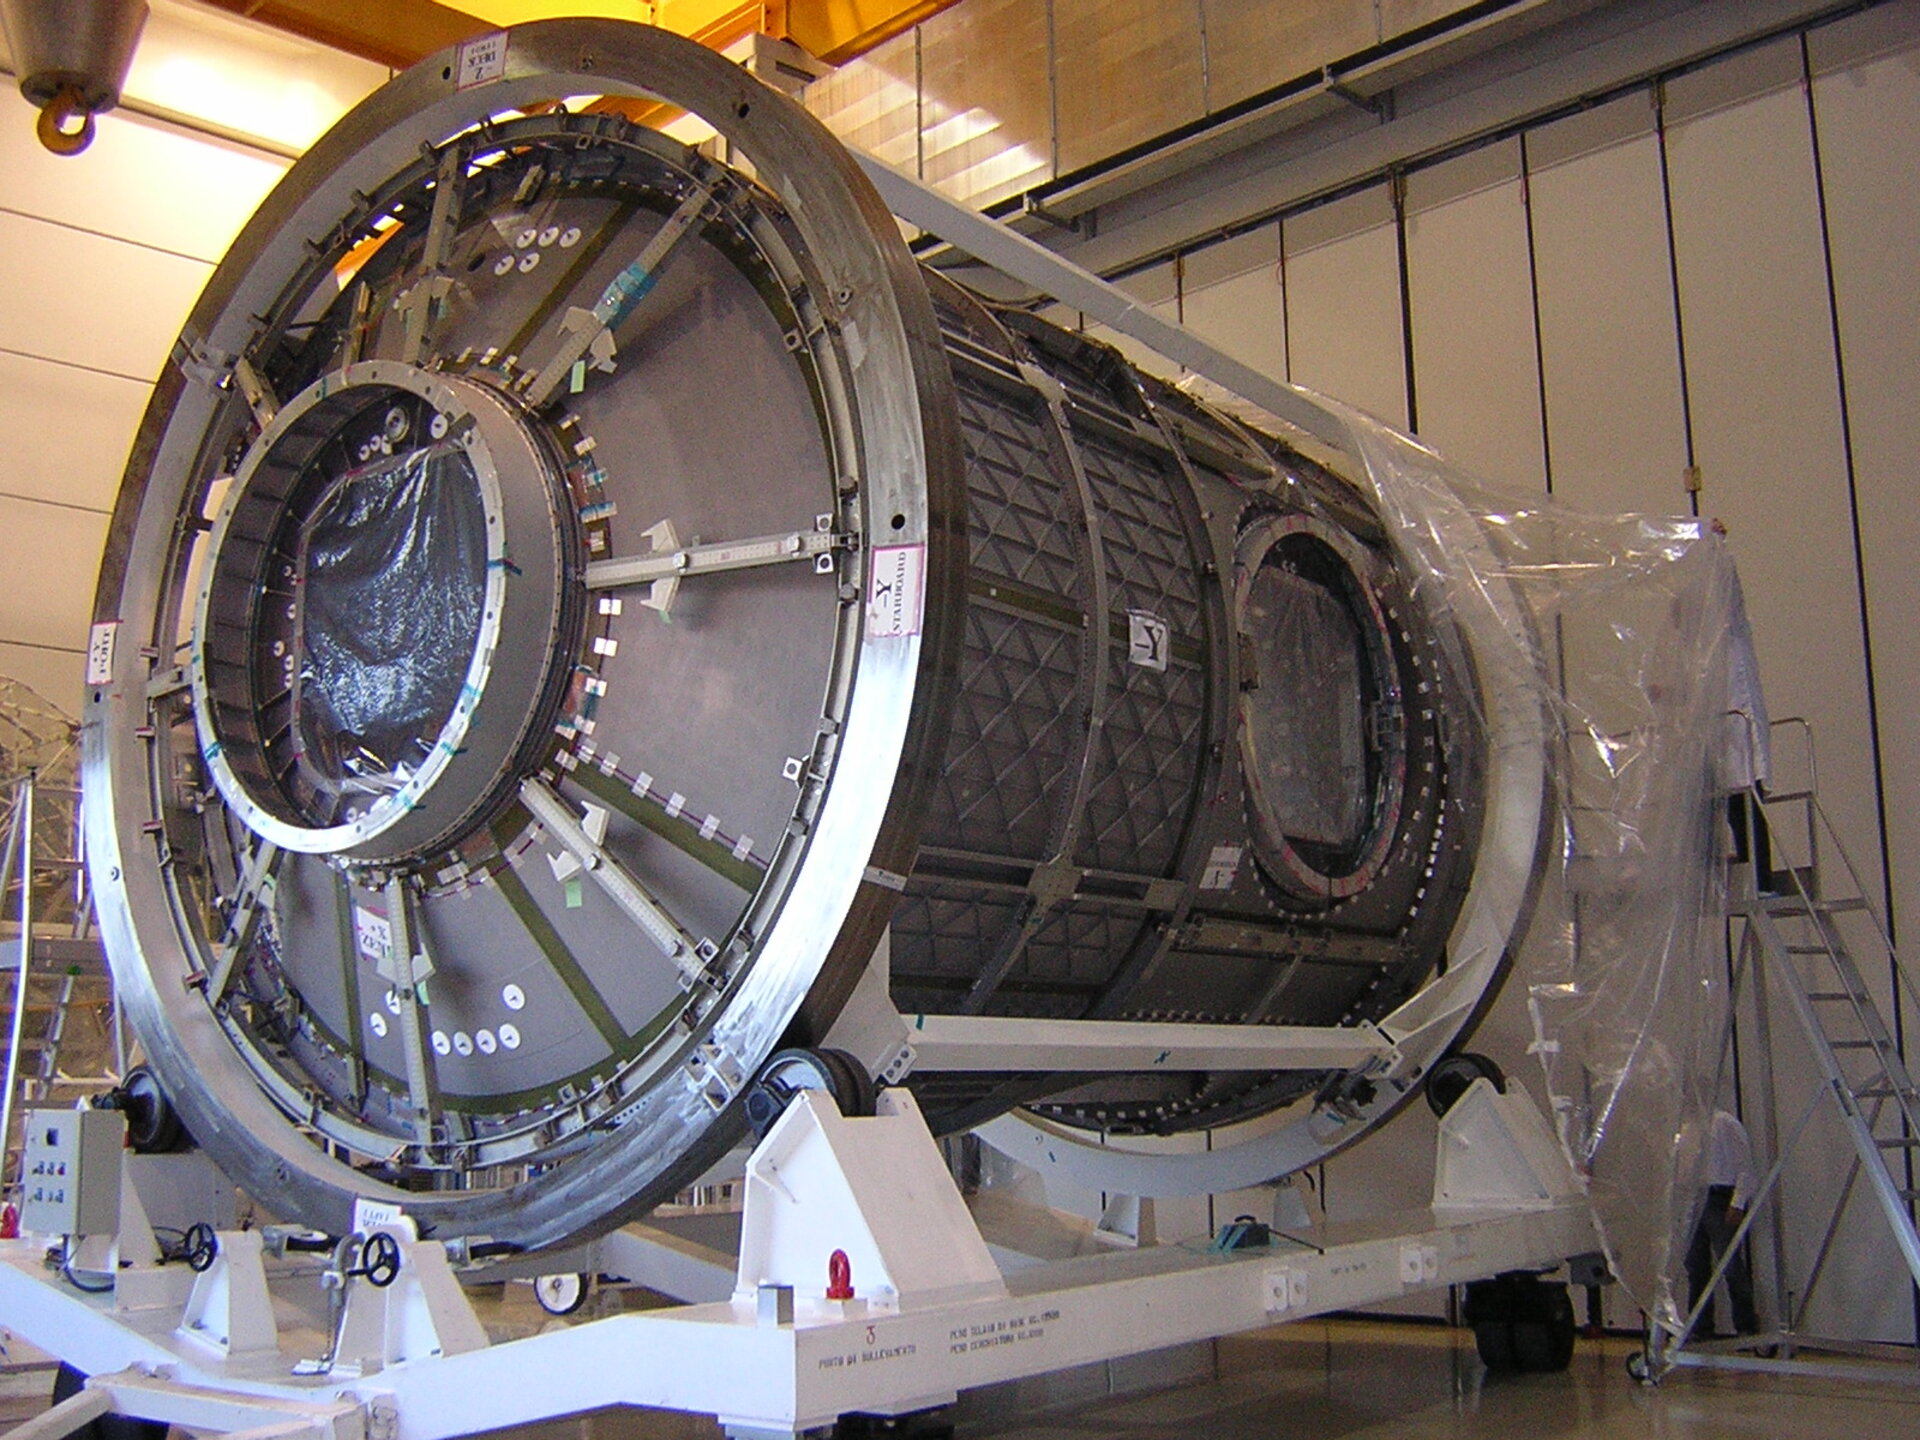 The Node 3 connecting module, built by prime contractor Thales Alenia Space in Turin, Italy